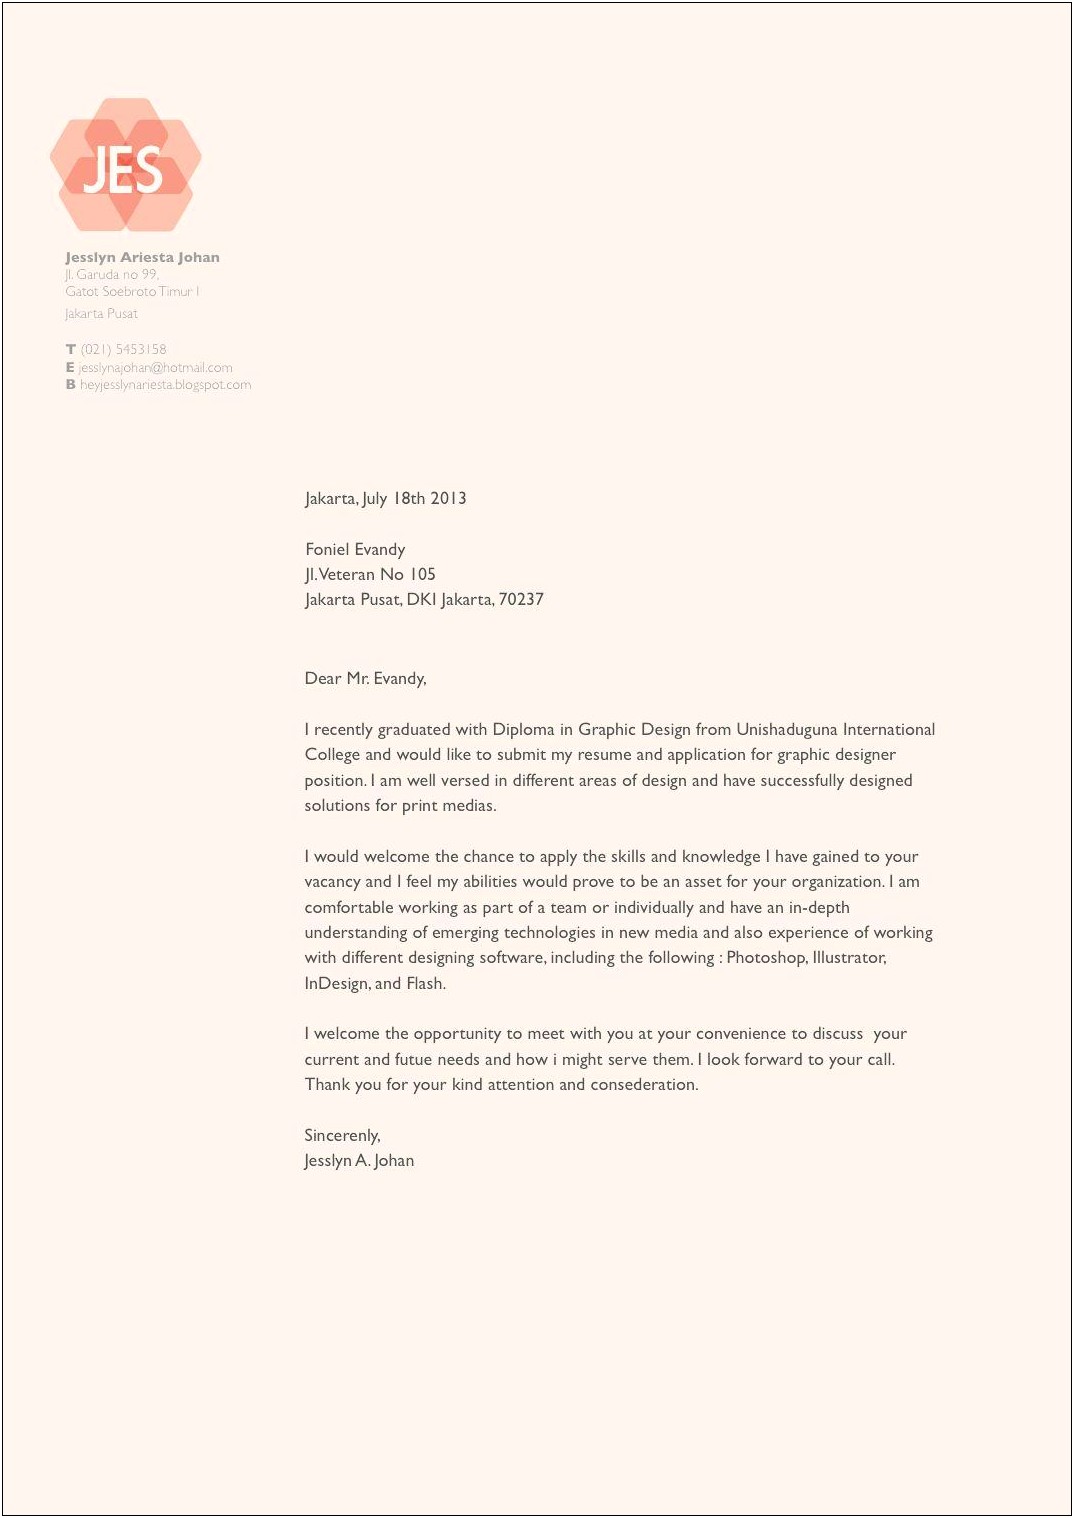 Cover Letter And Resume Parts 2018.docx